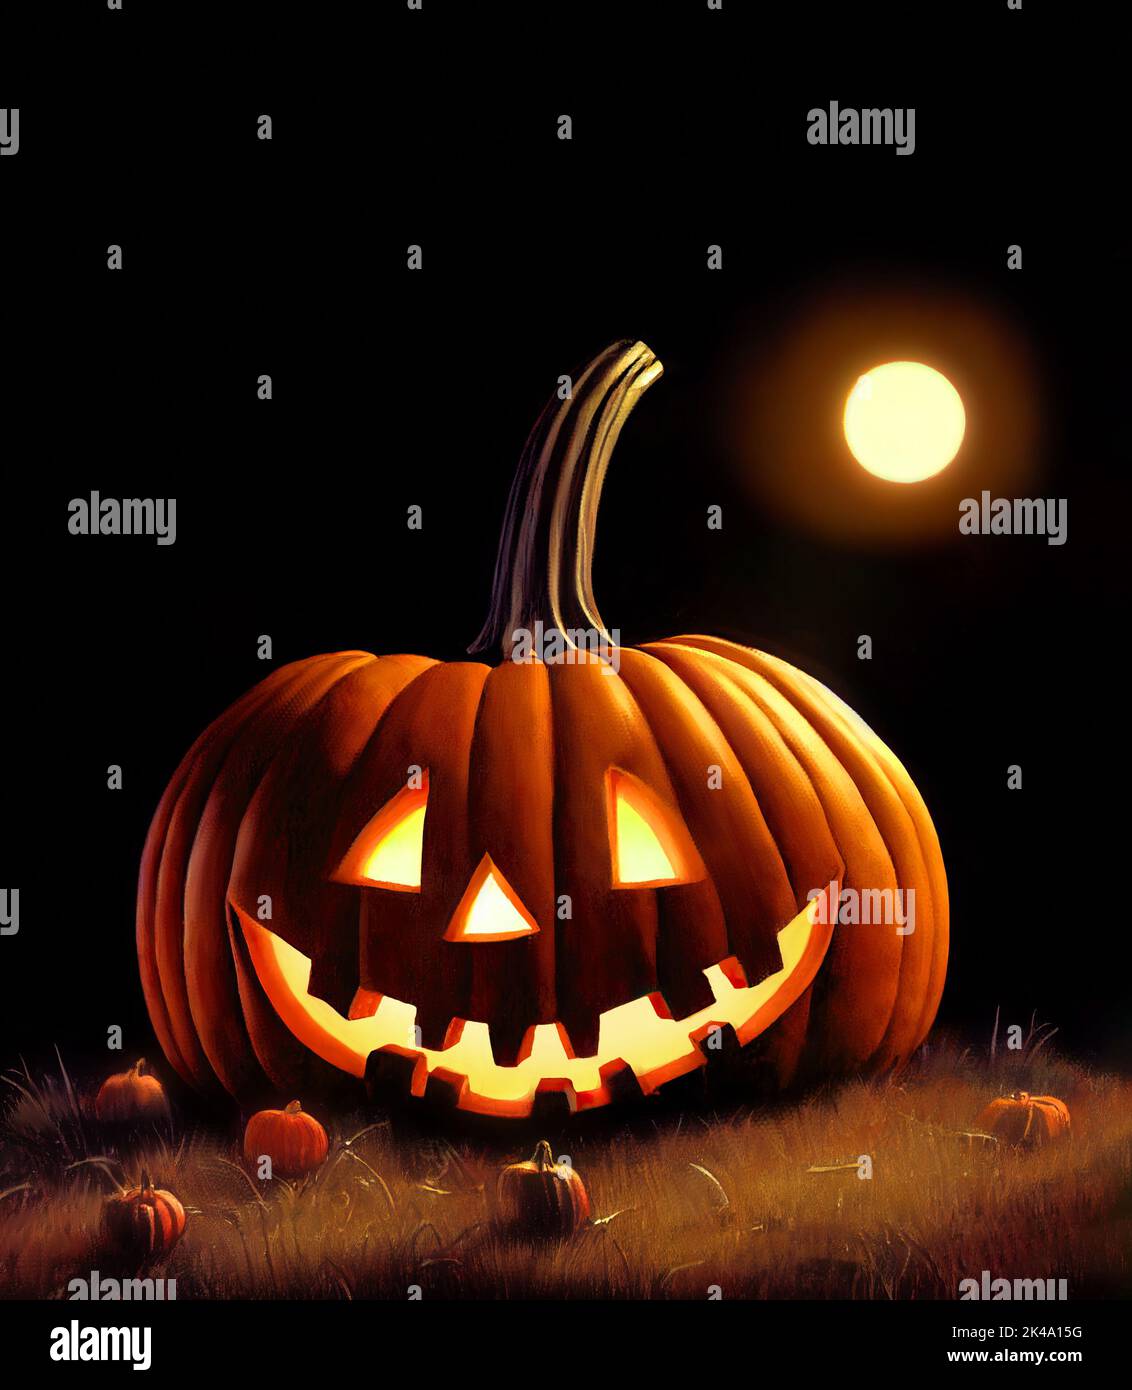 One huge Halloween pumpkin with glowing eyes smiling in a field at night under full moon. Digital illustration with copy space Stock Photo